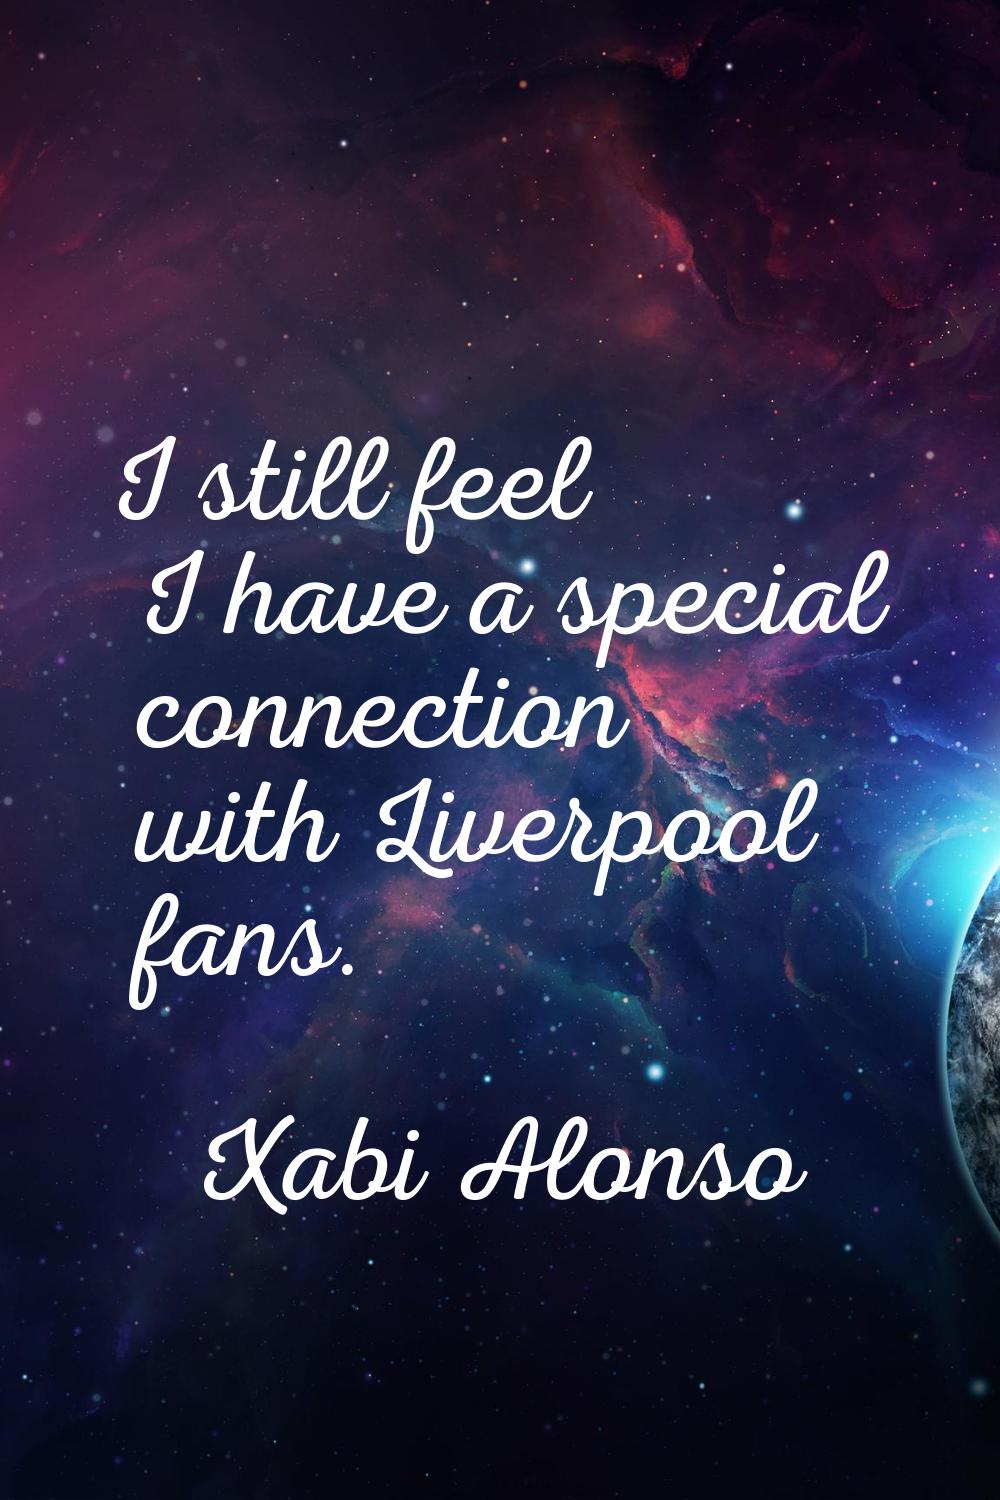 I still feel I have a special connection with Liverpool fans.